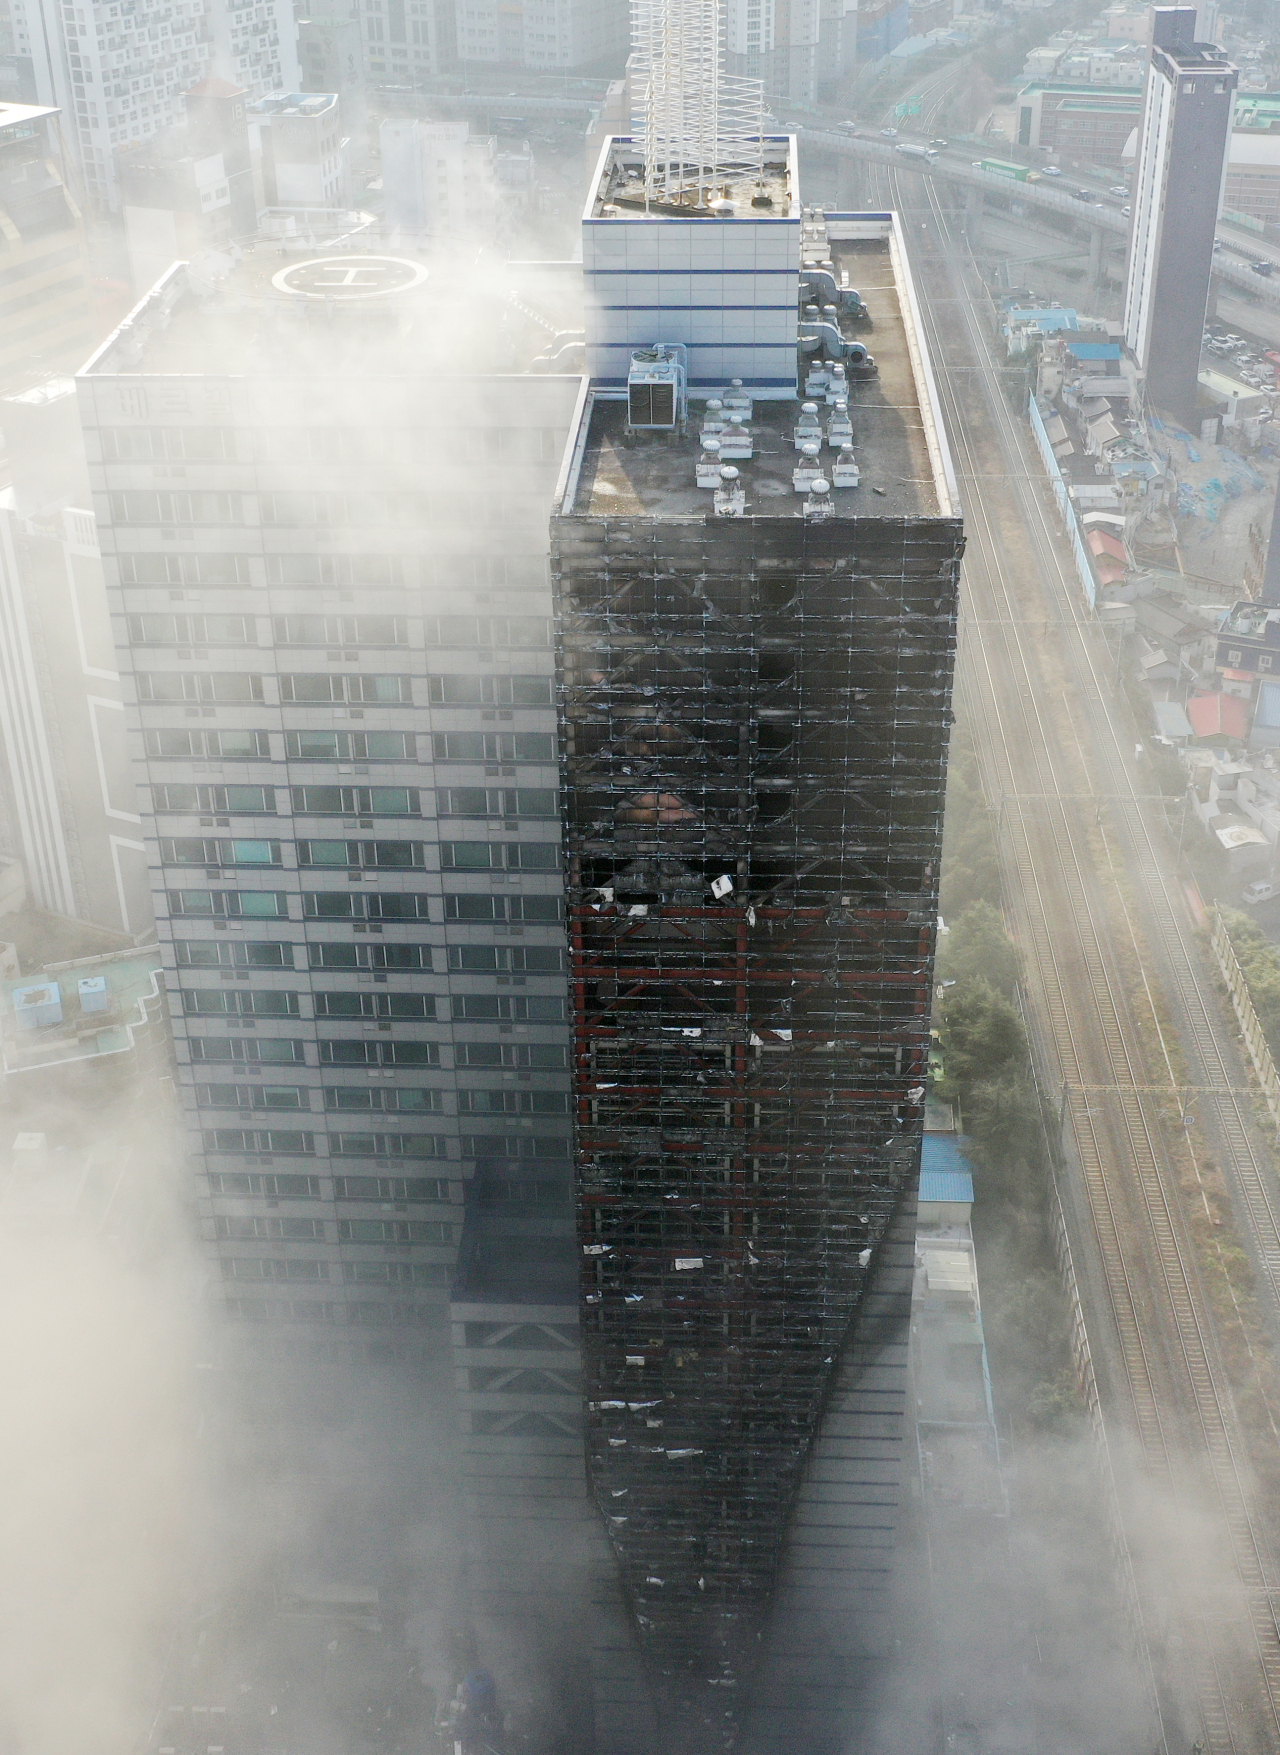 White smoke billows from a parking tower in the southeastern port city of Busan on Monday, after it was engulfed in a fire. (Yonhap)